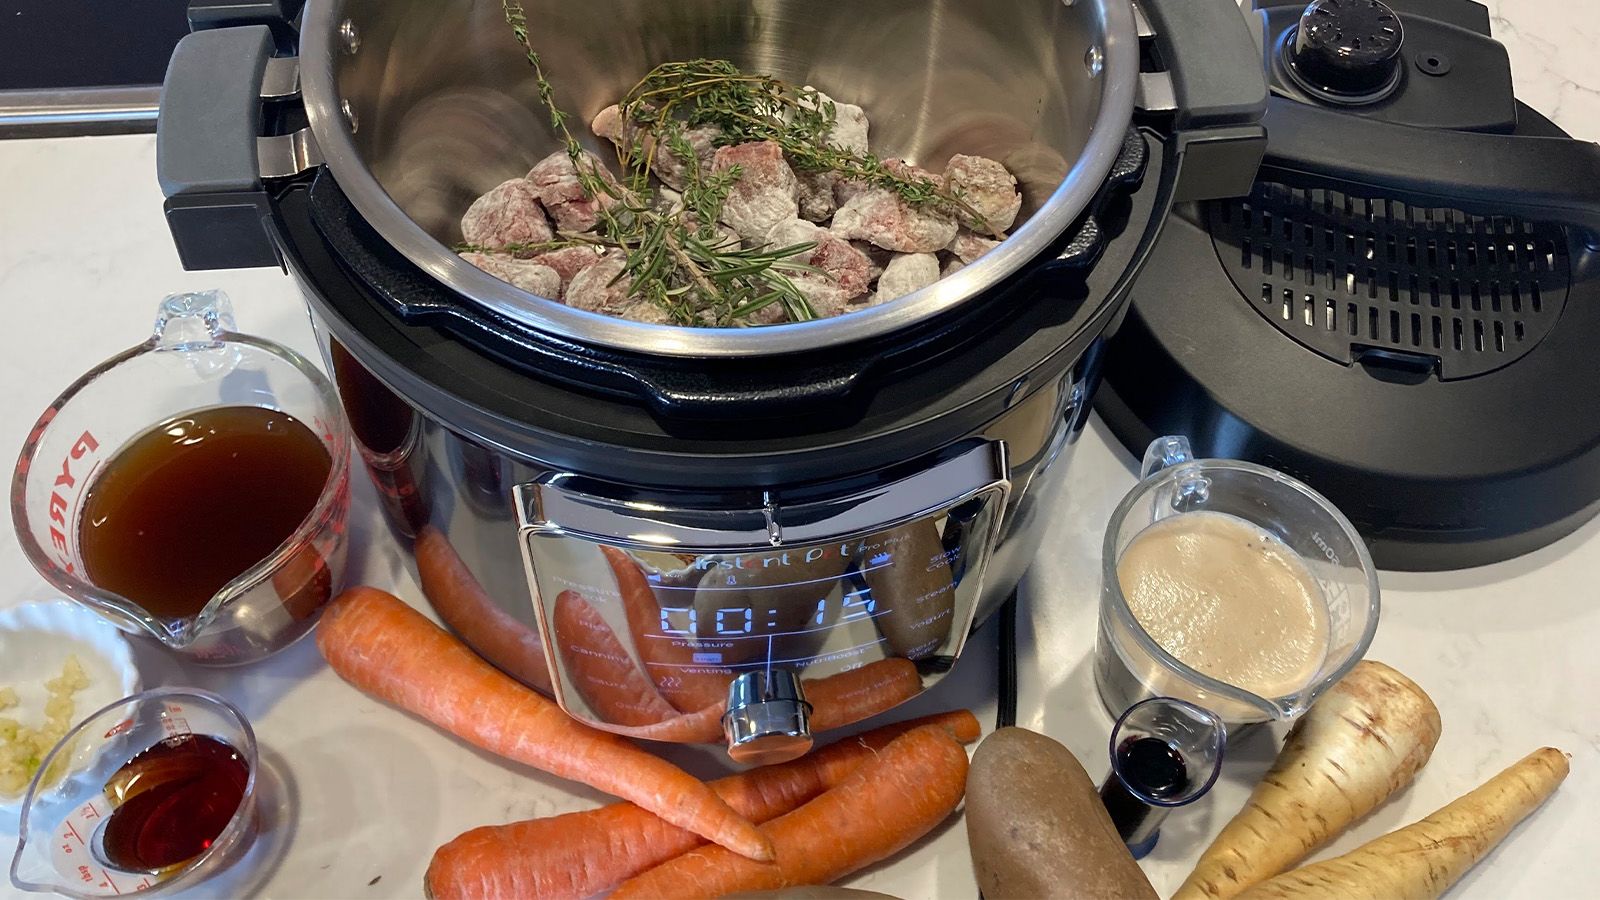 Star Wars Instant Pots: The force is strong with this inspired